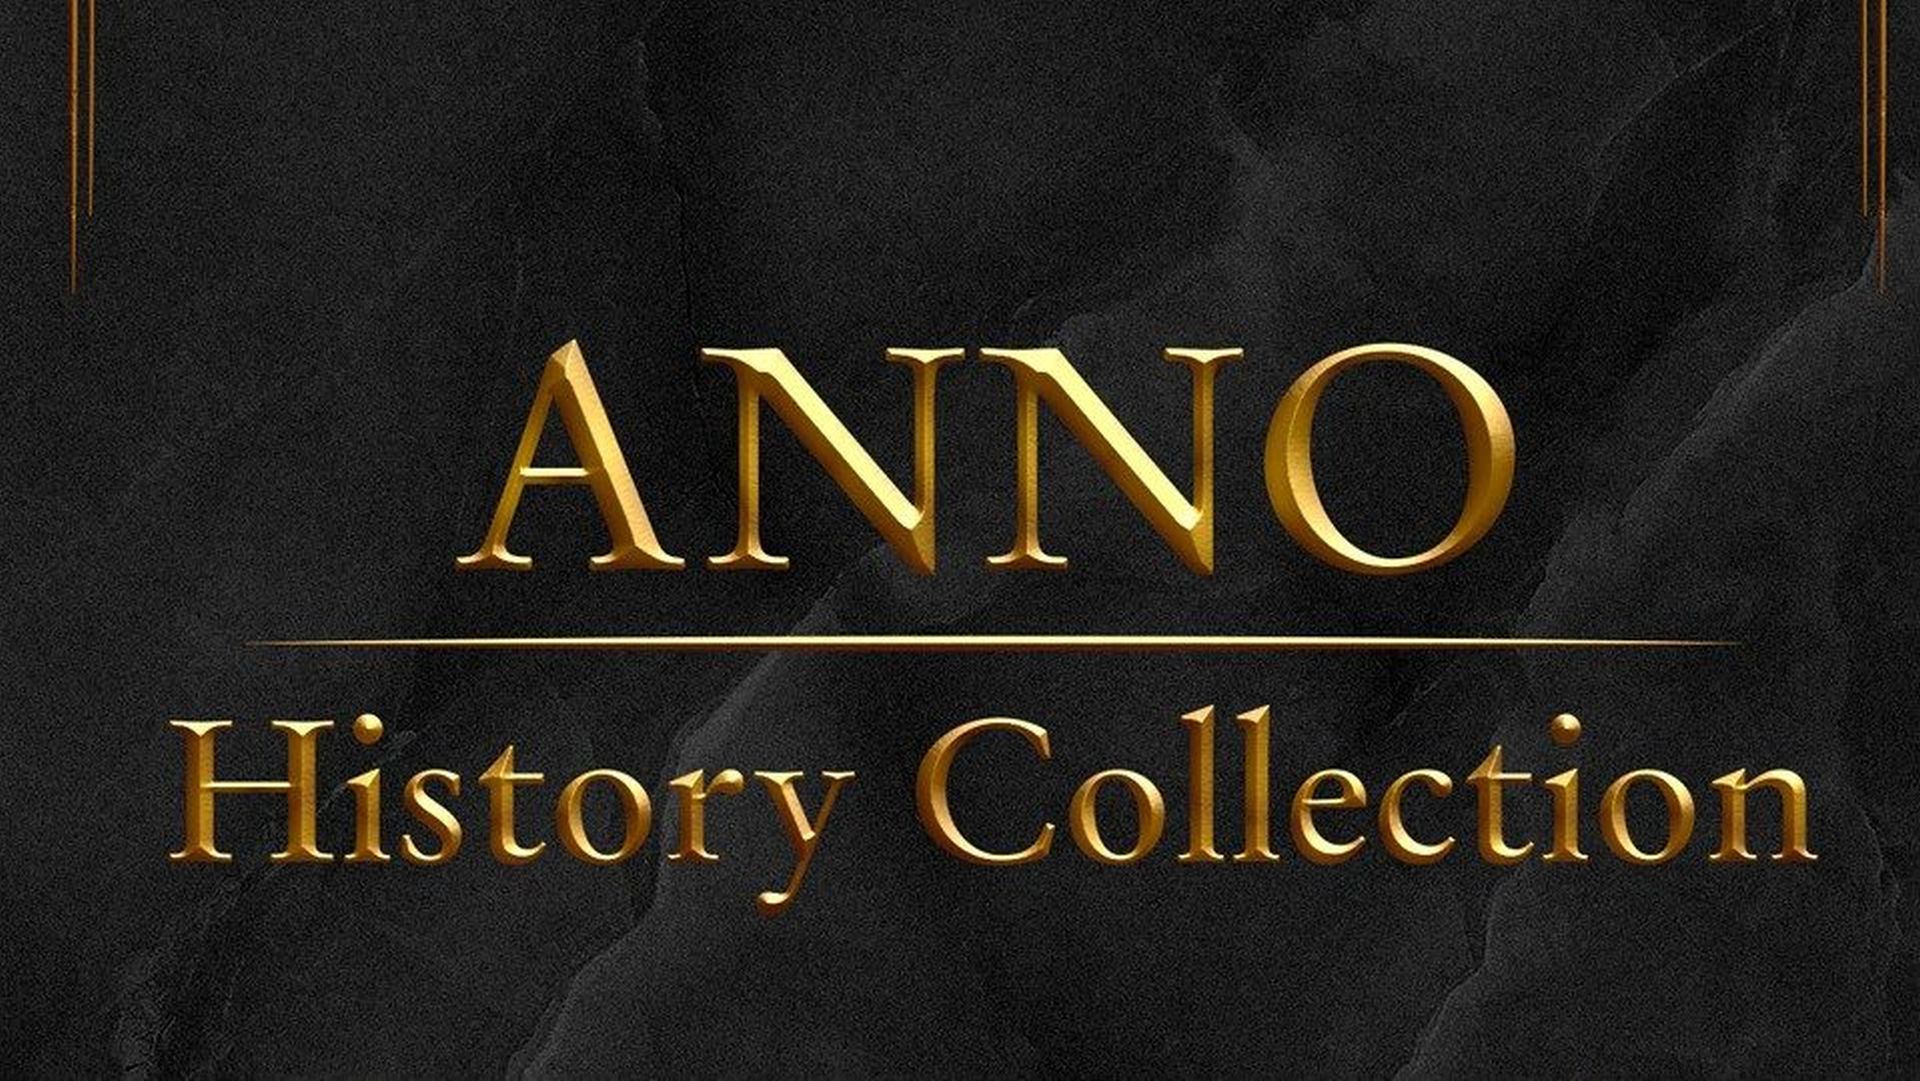 Anno History Collection Classic Support Titles 4 Contains 4K Announced, With